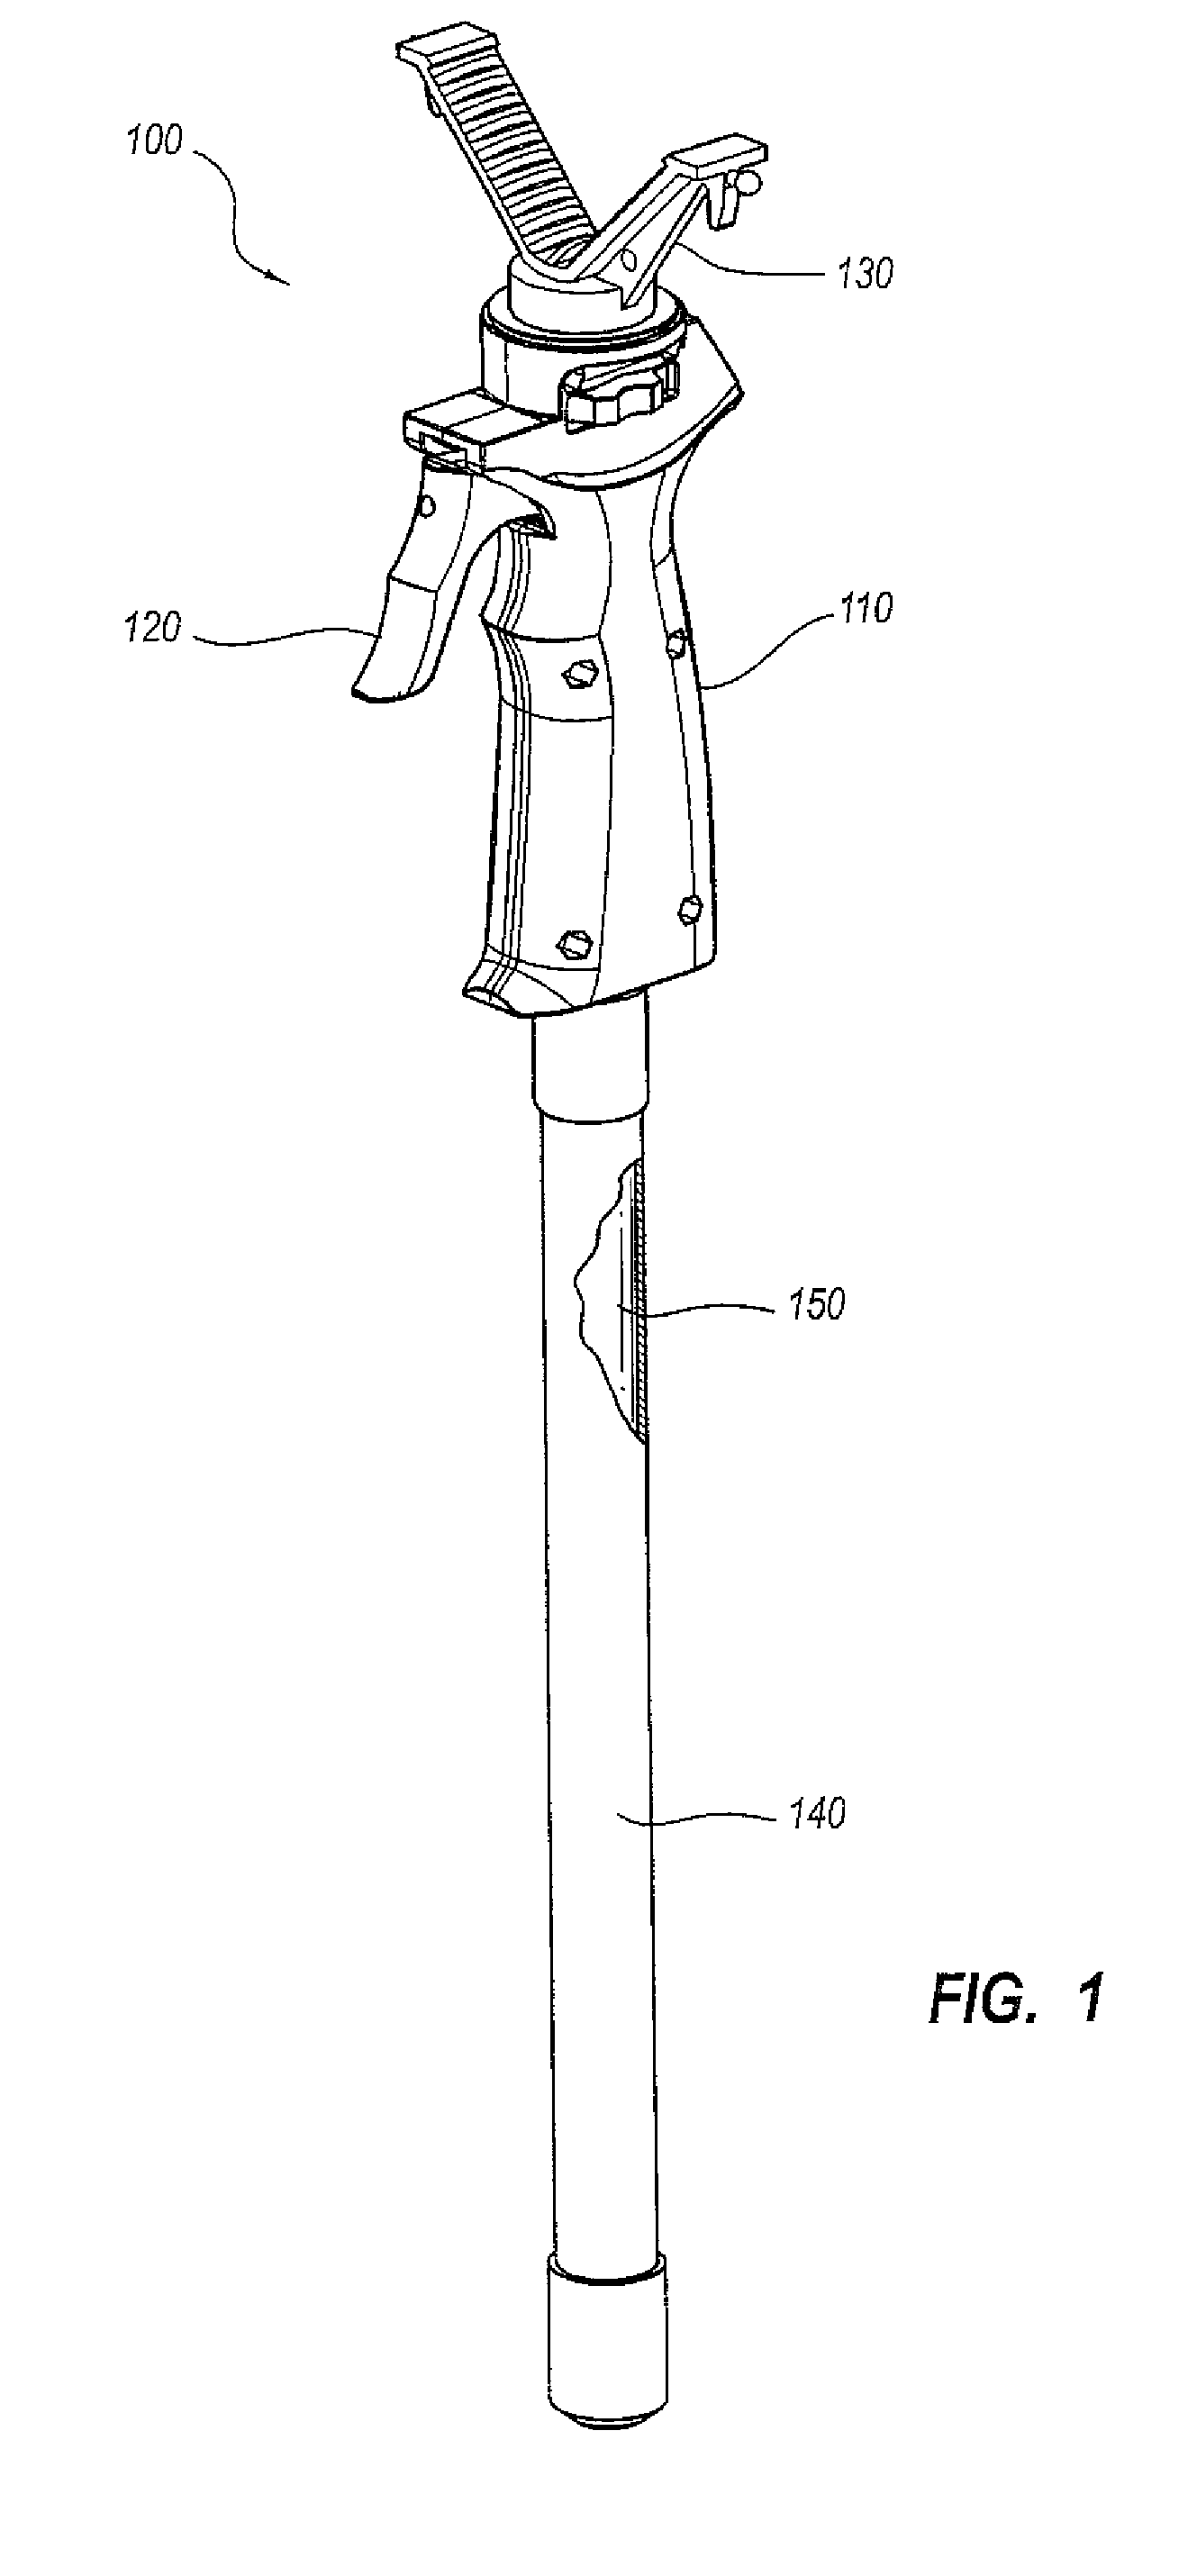 Telescoping support stand apparatus